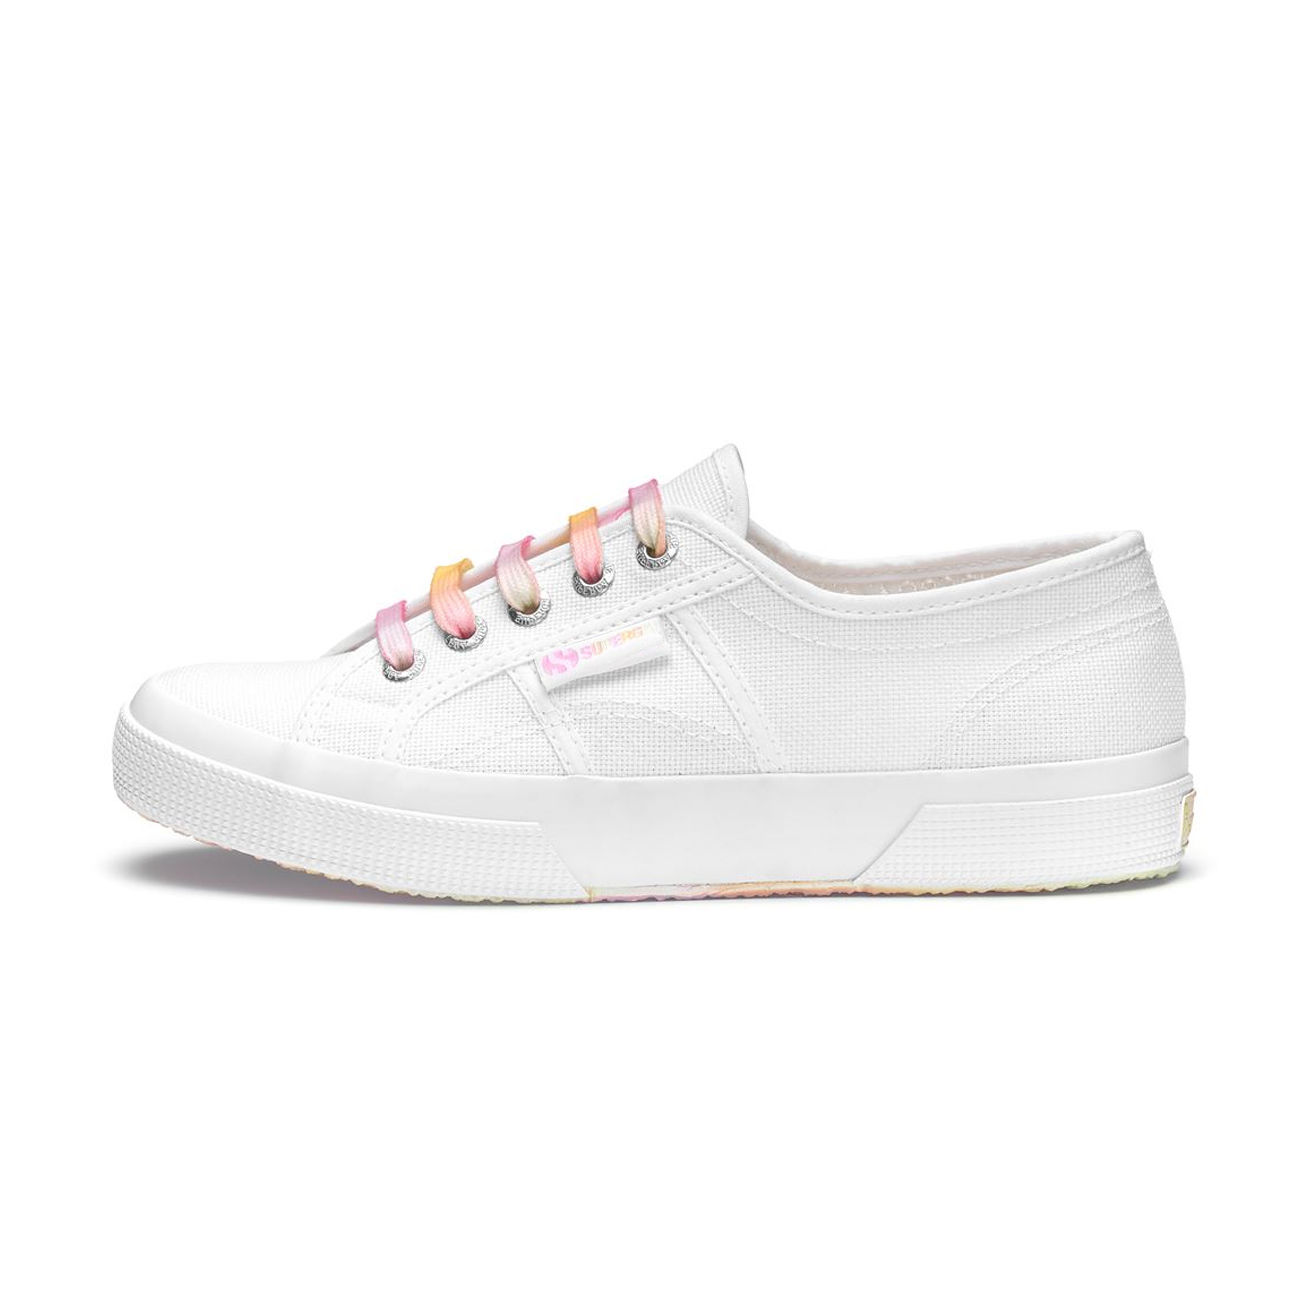 Kate Middleton's Superga Sneakers Are 44% Off Right Now